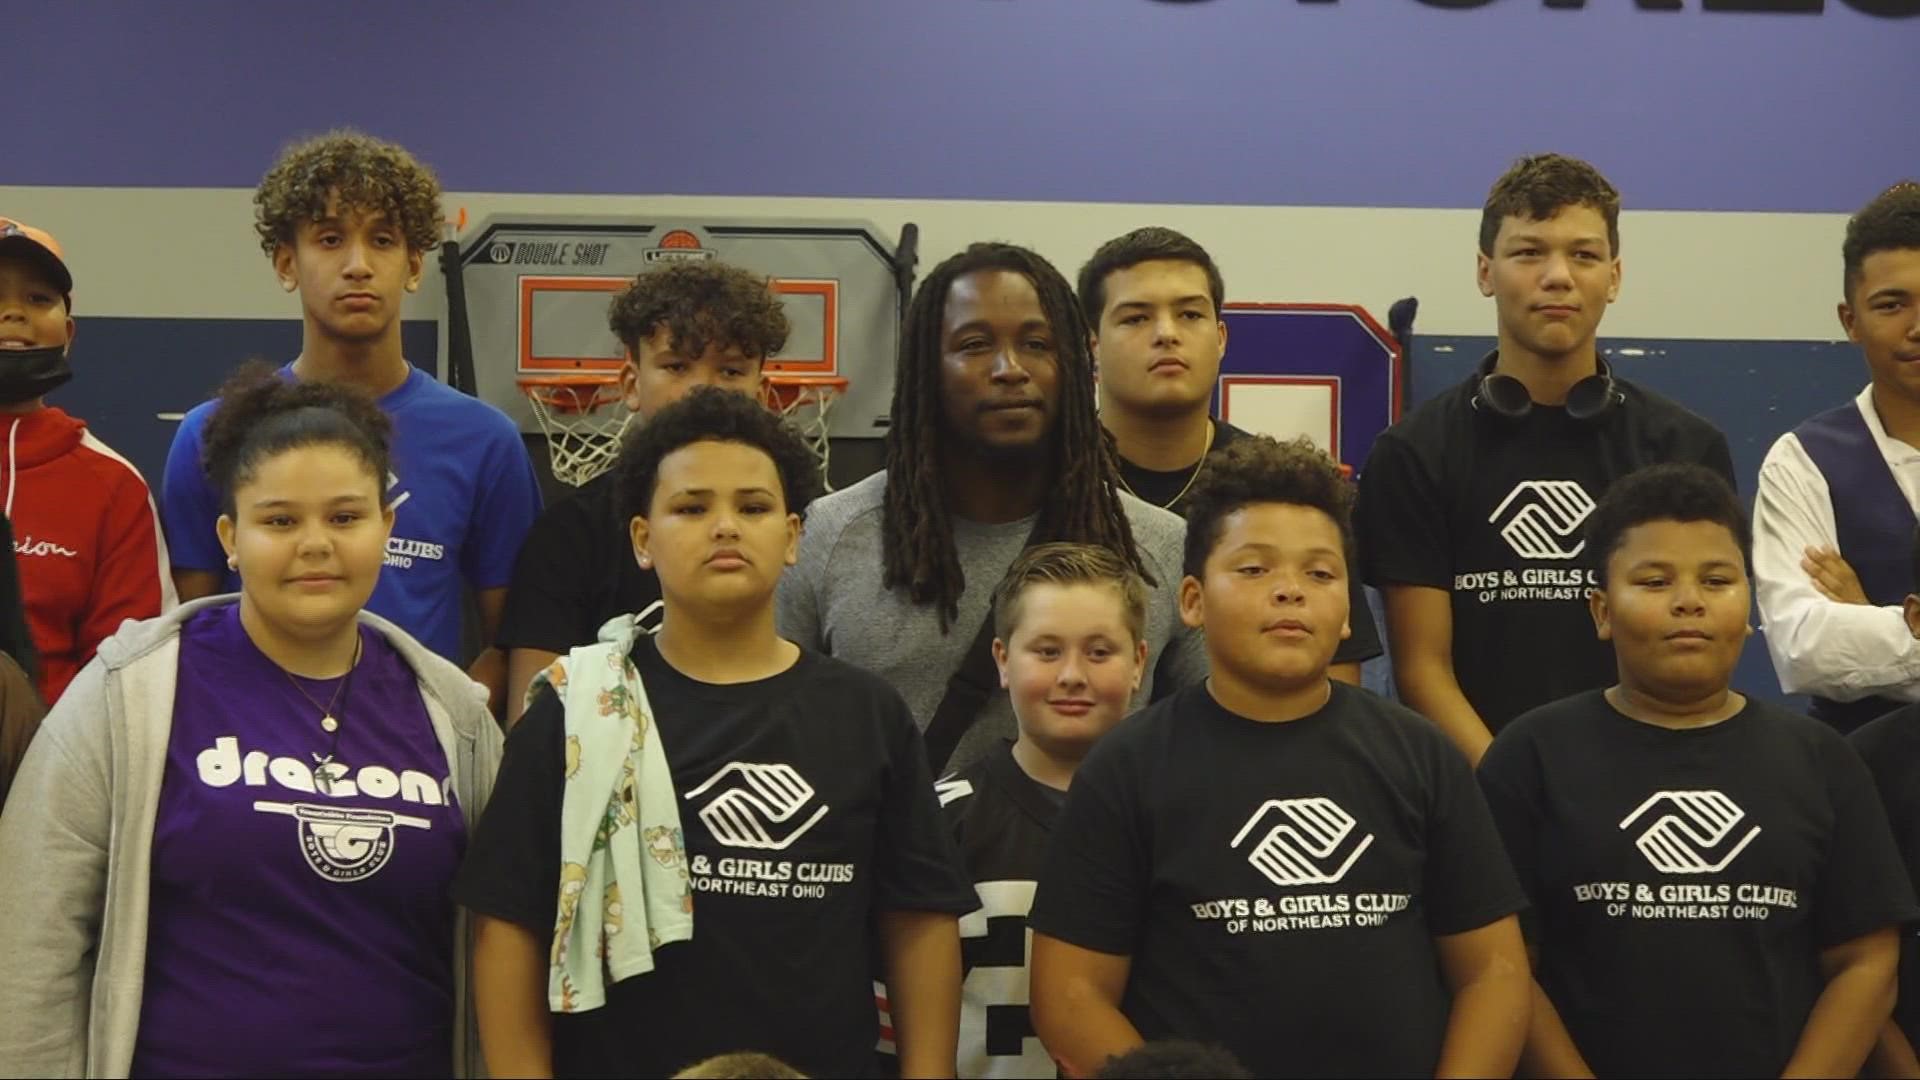 The Browns running back teamed up with other Browns teammates to give the kids a day they'll never forget